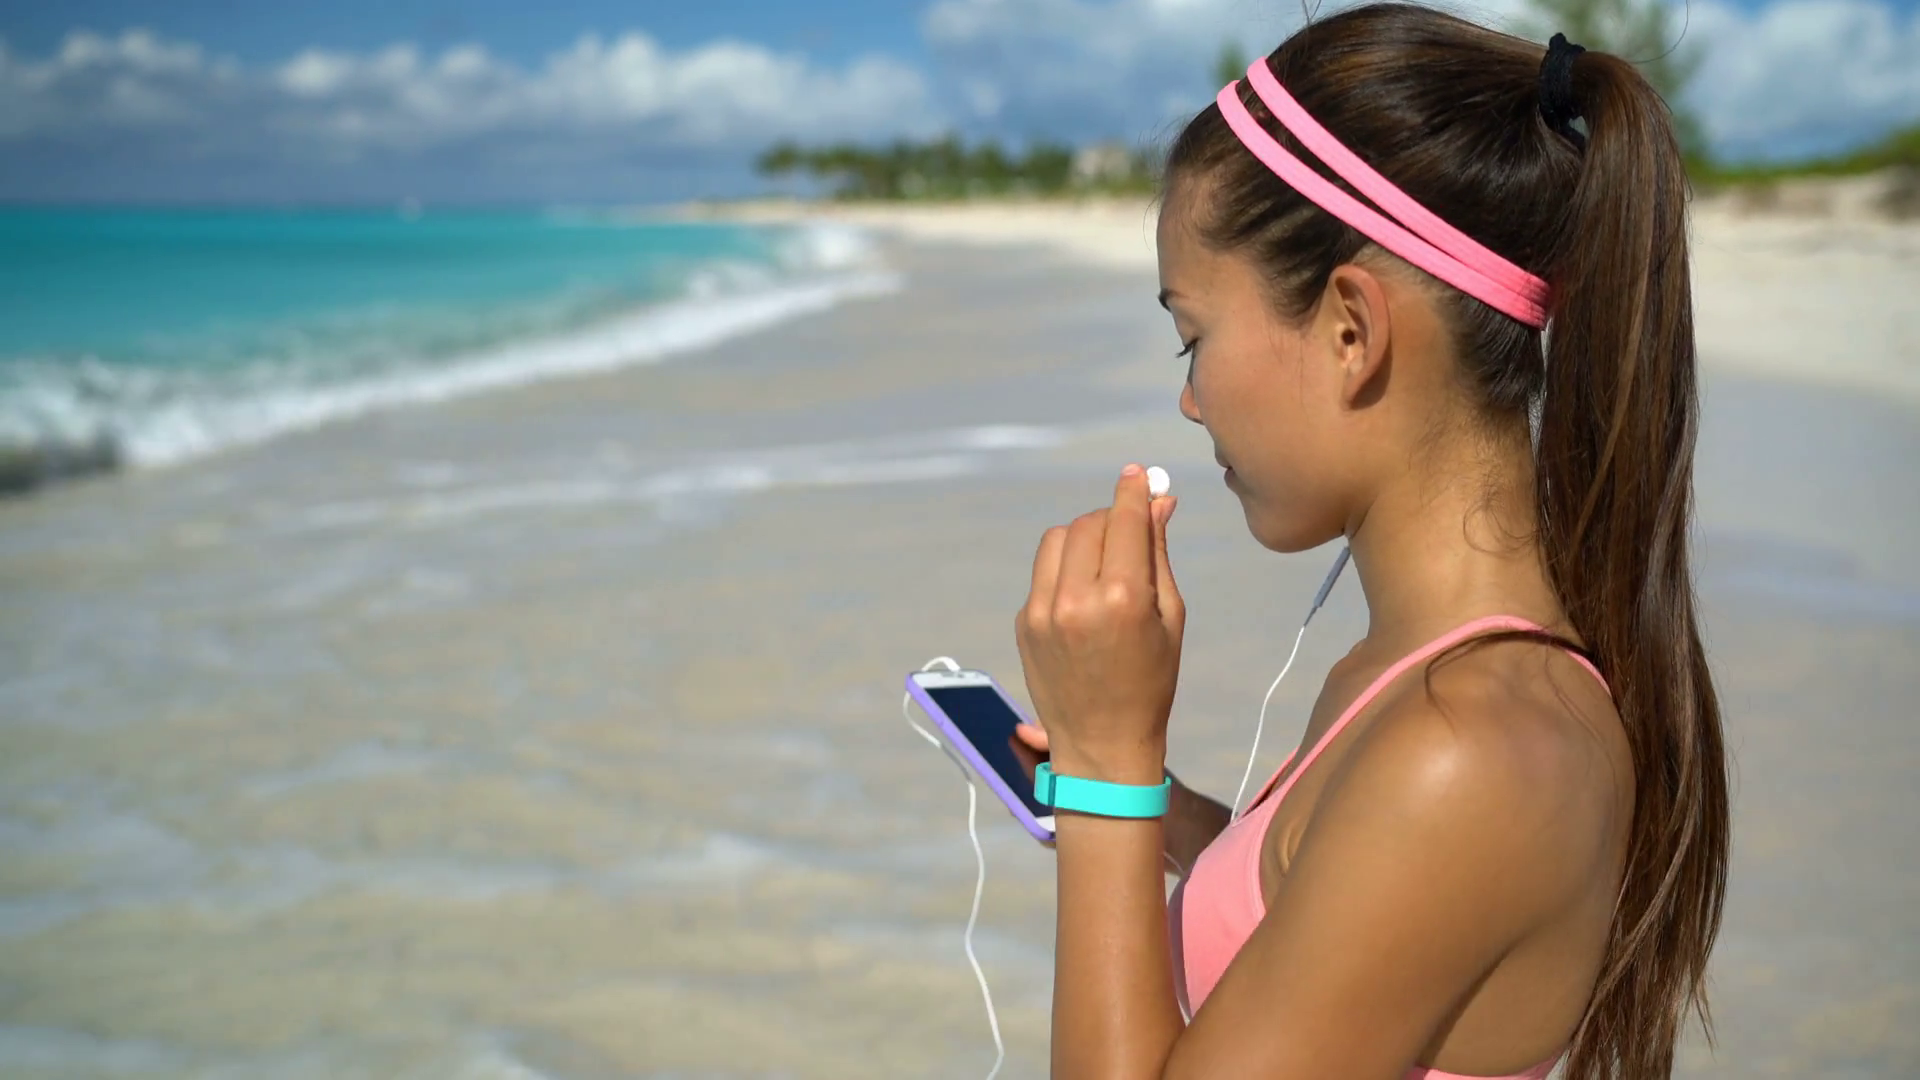 woman-listening-to-music-running-exercising-on-beach-young-woman-putting-earphones-in-ear-getting-ready-to-run-on-sea-shore-female-fitness-girl-training-listening-music-while-jogging-on-sunny-day_hz0ah_-fx_thumbnai